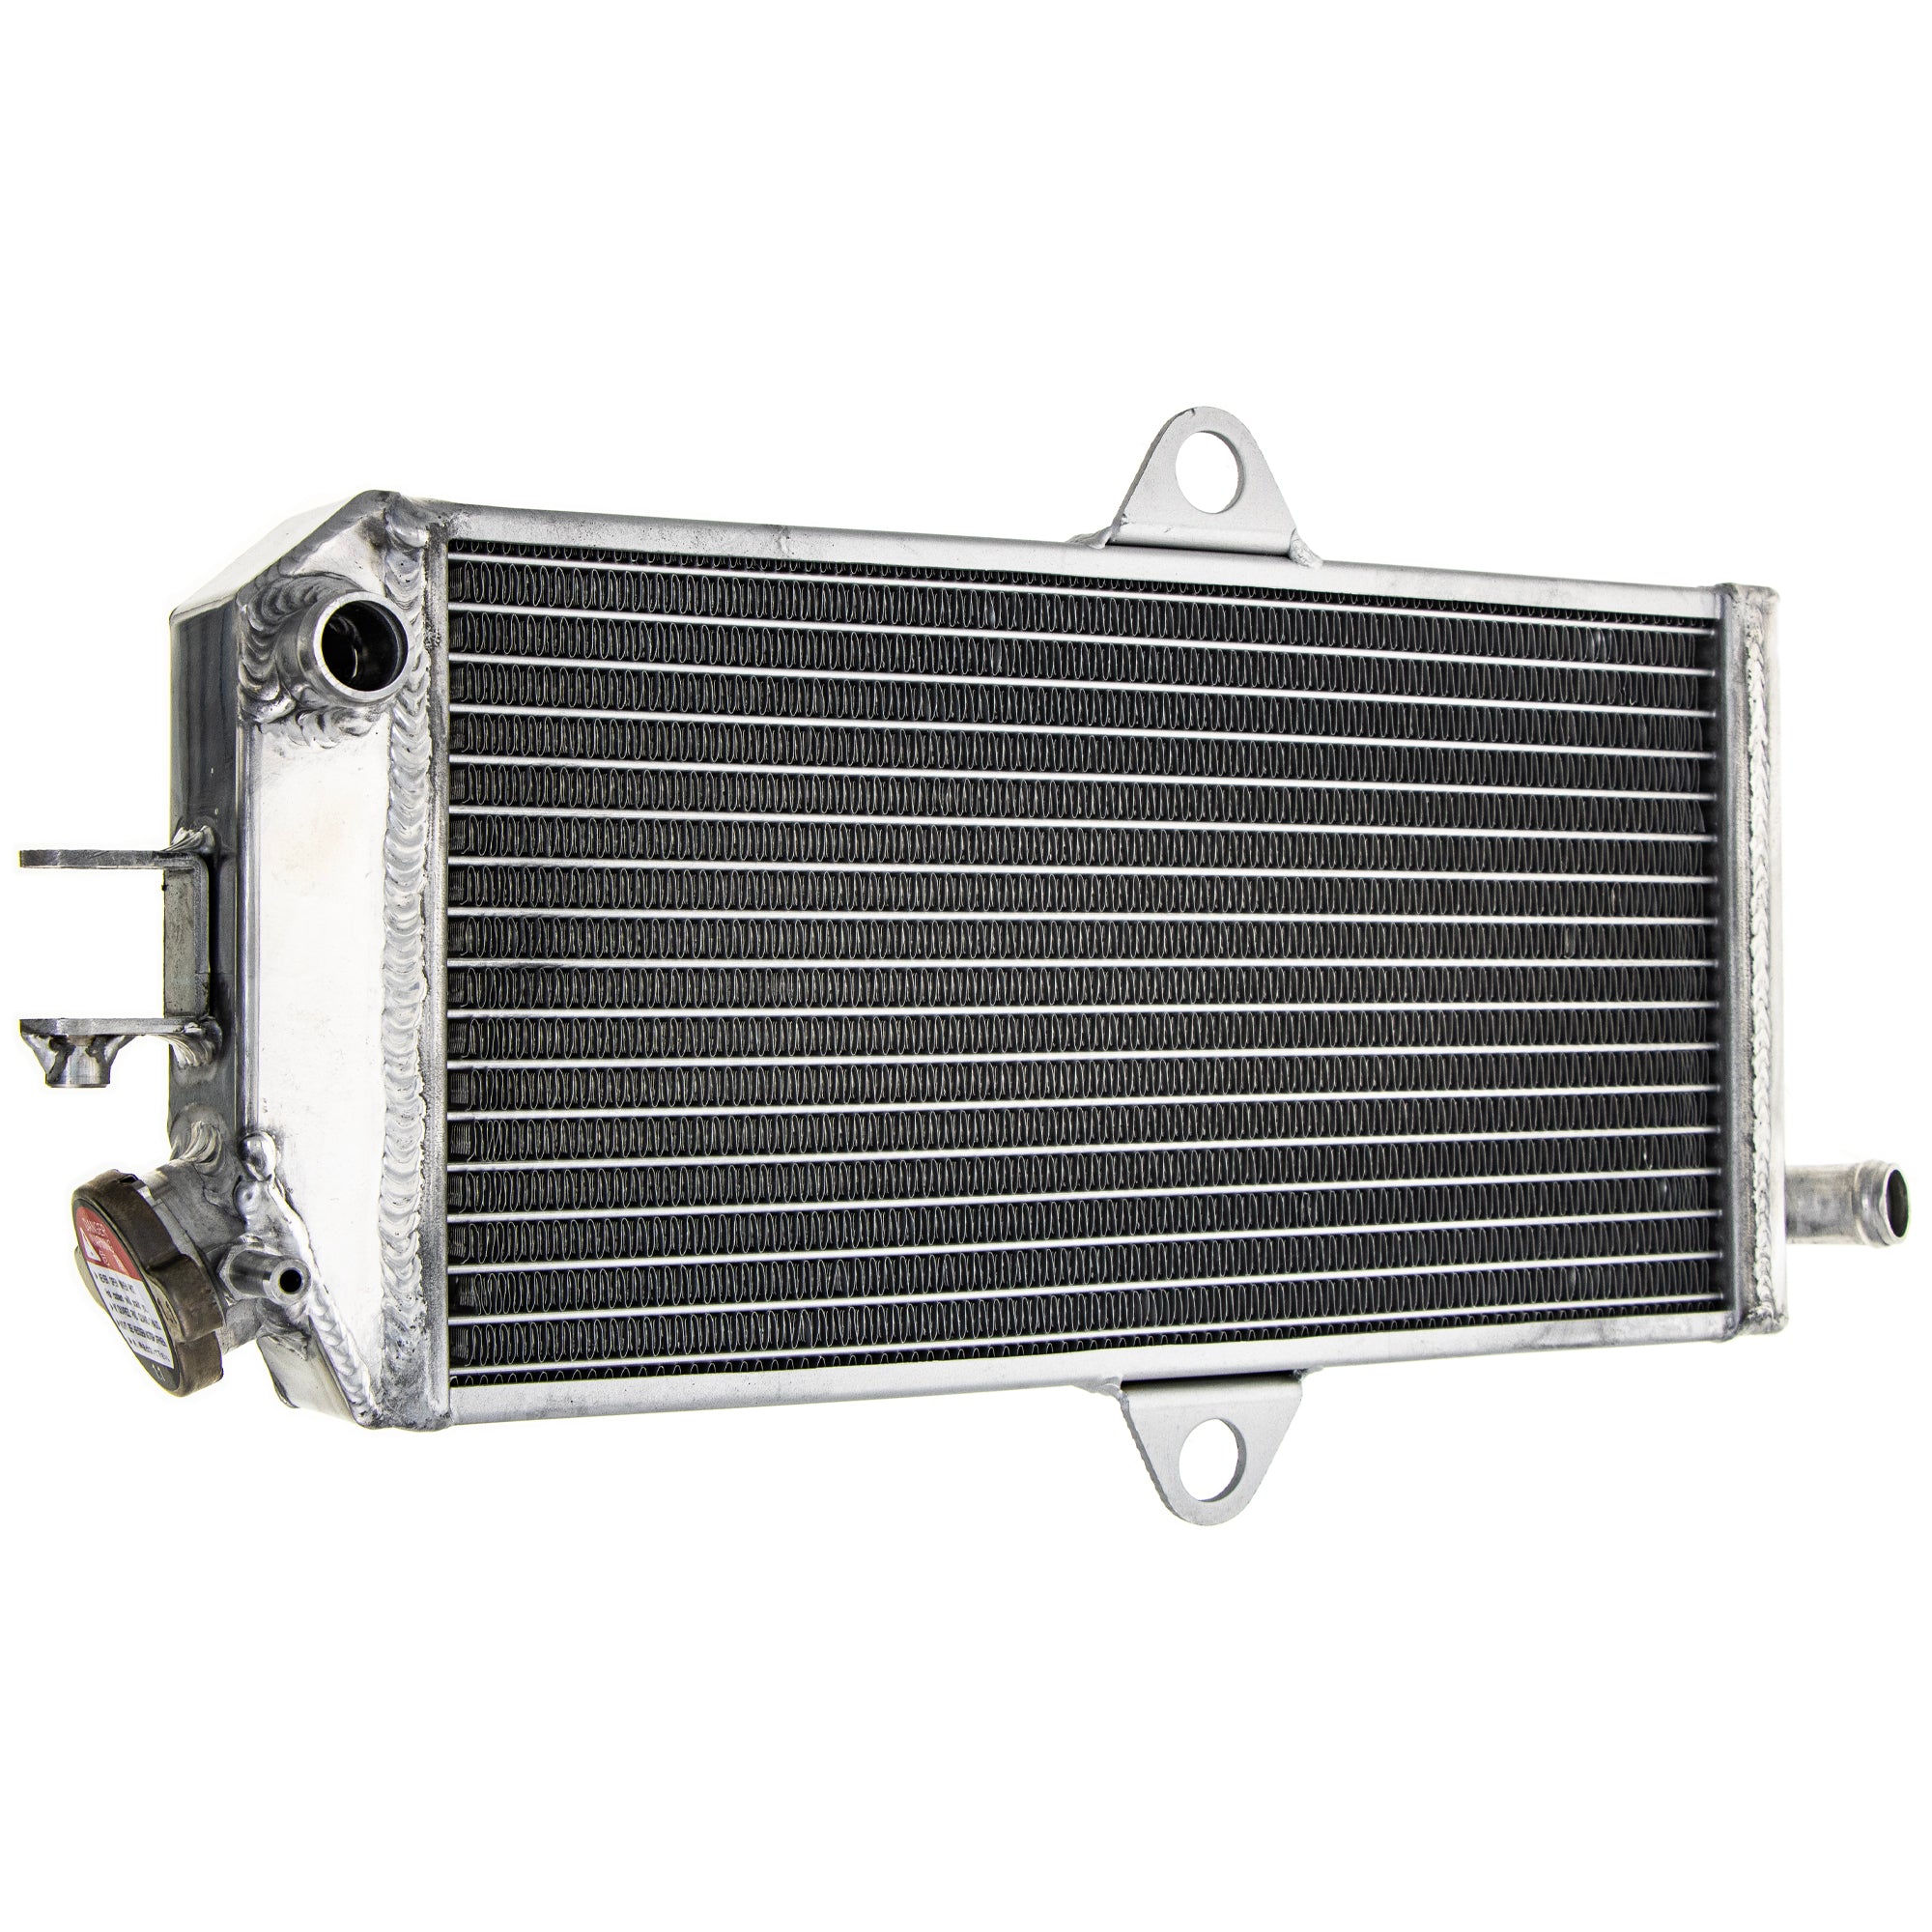 High Capacity Radiator for zOTHER Quadracer NICHE 519-CRD2233A